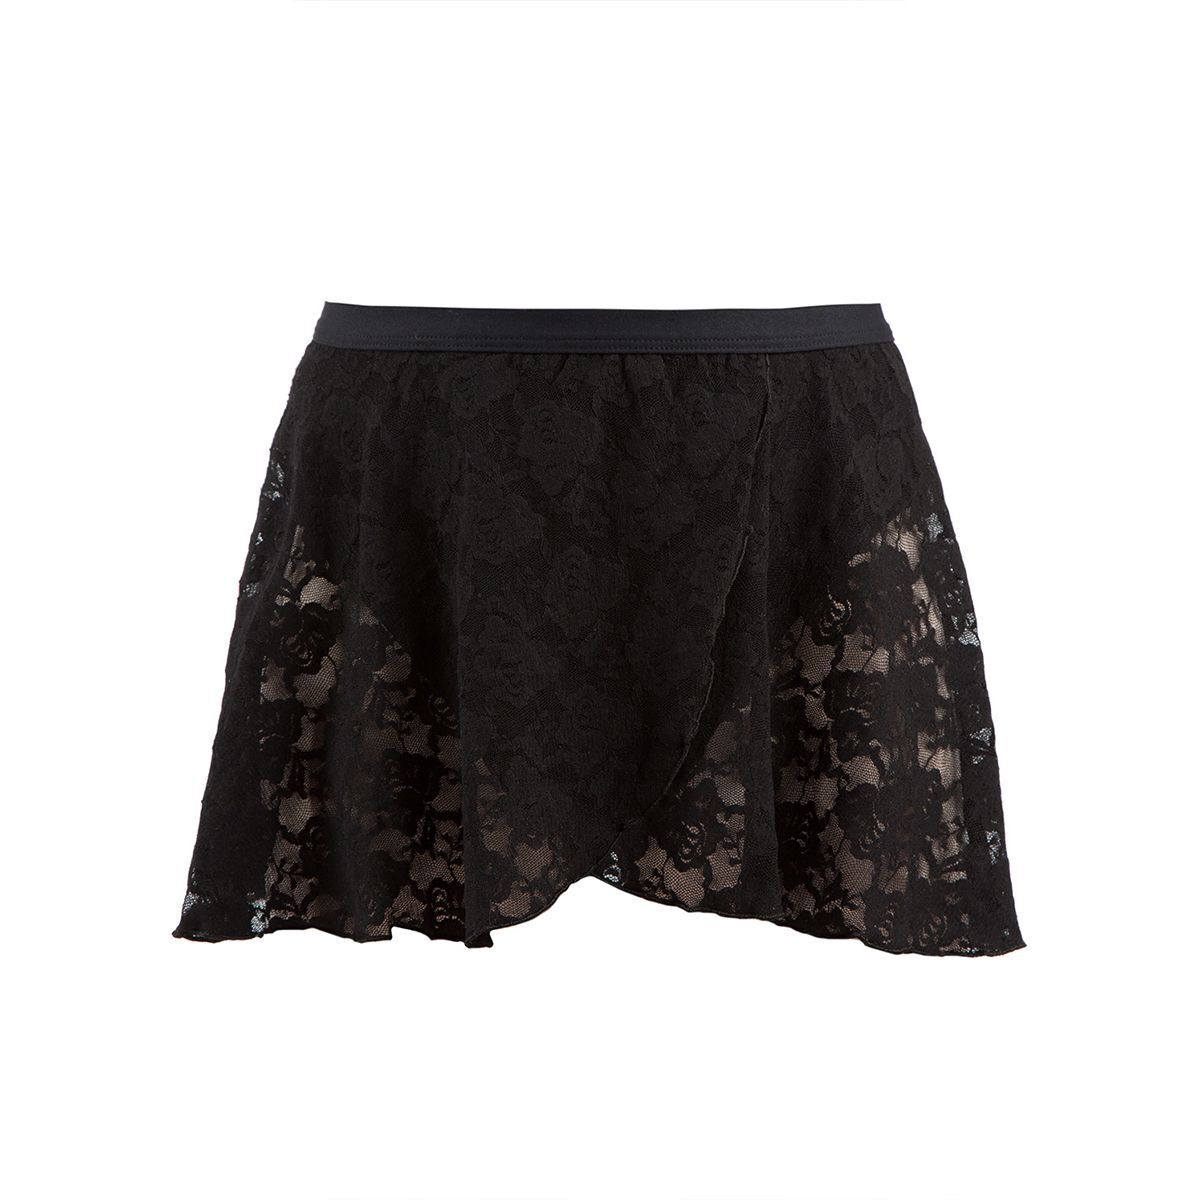 Energetiks Melody Lace Skirt Adult